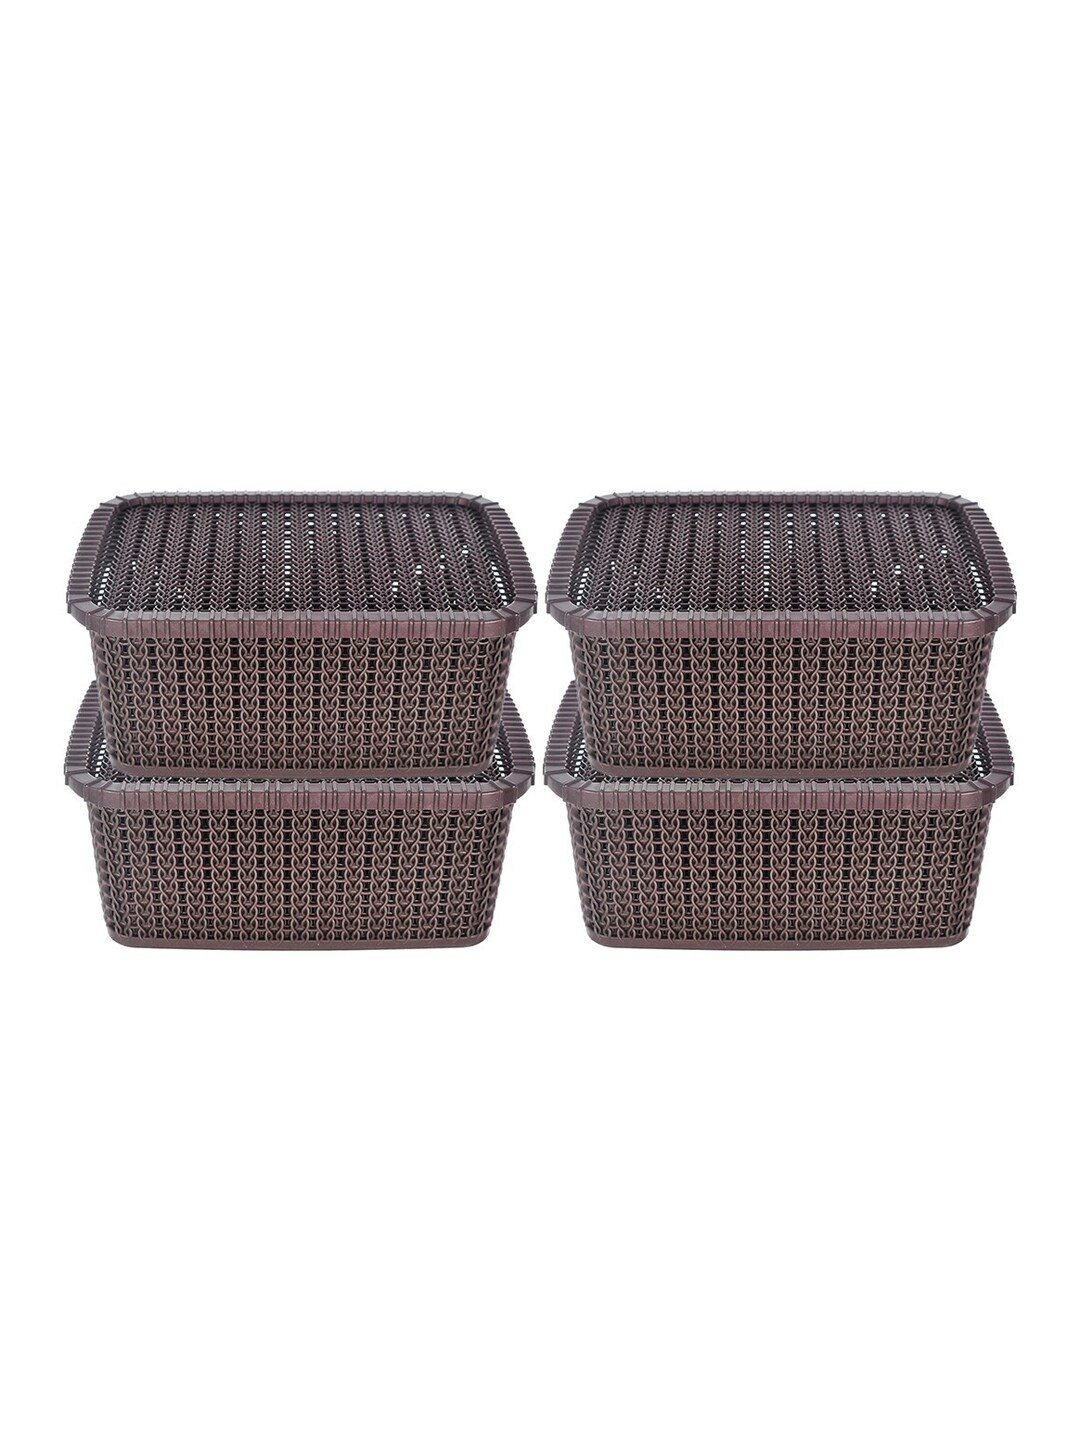 Kuber Industries Set Of 4 Brown Textured Plastic Baskets With Lids Price in India